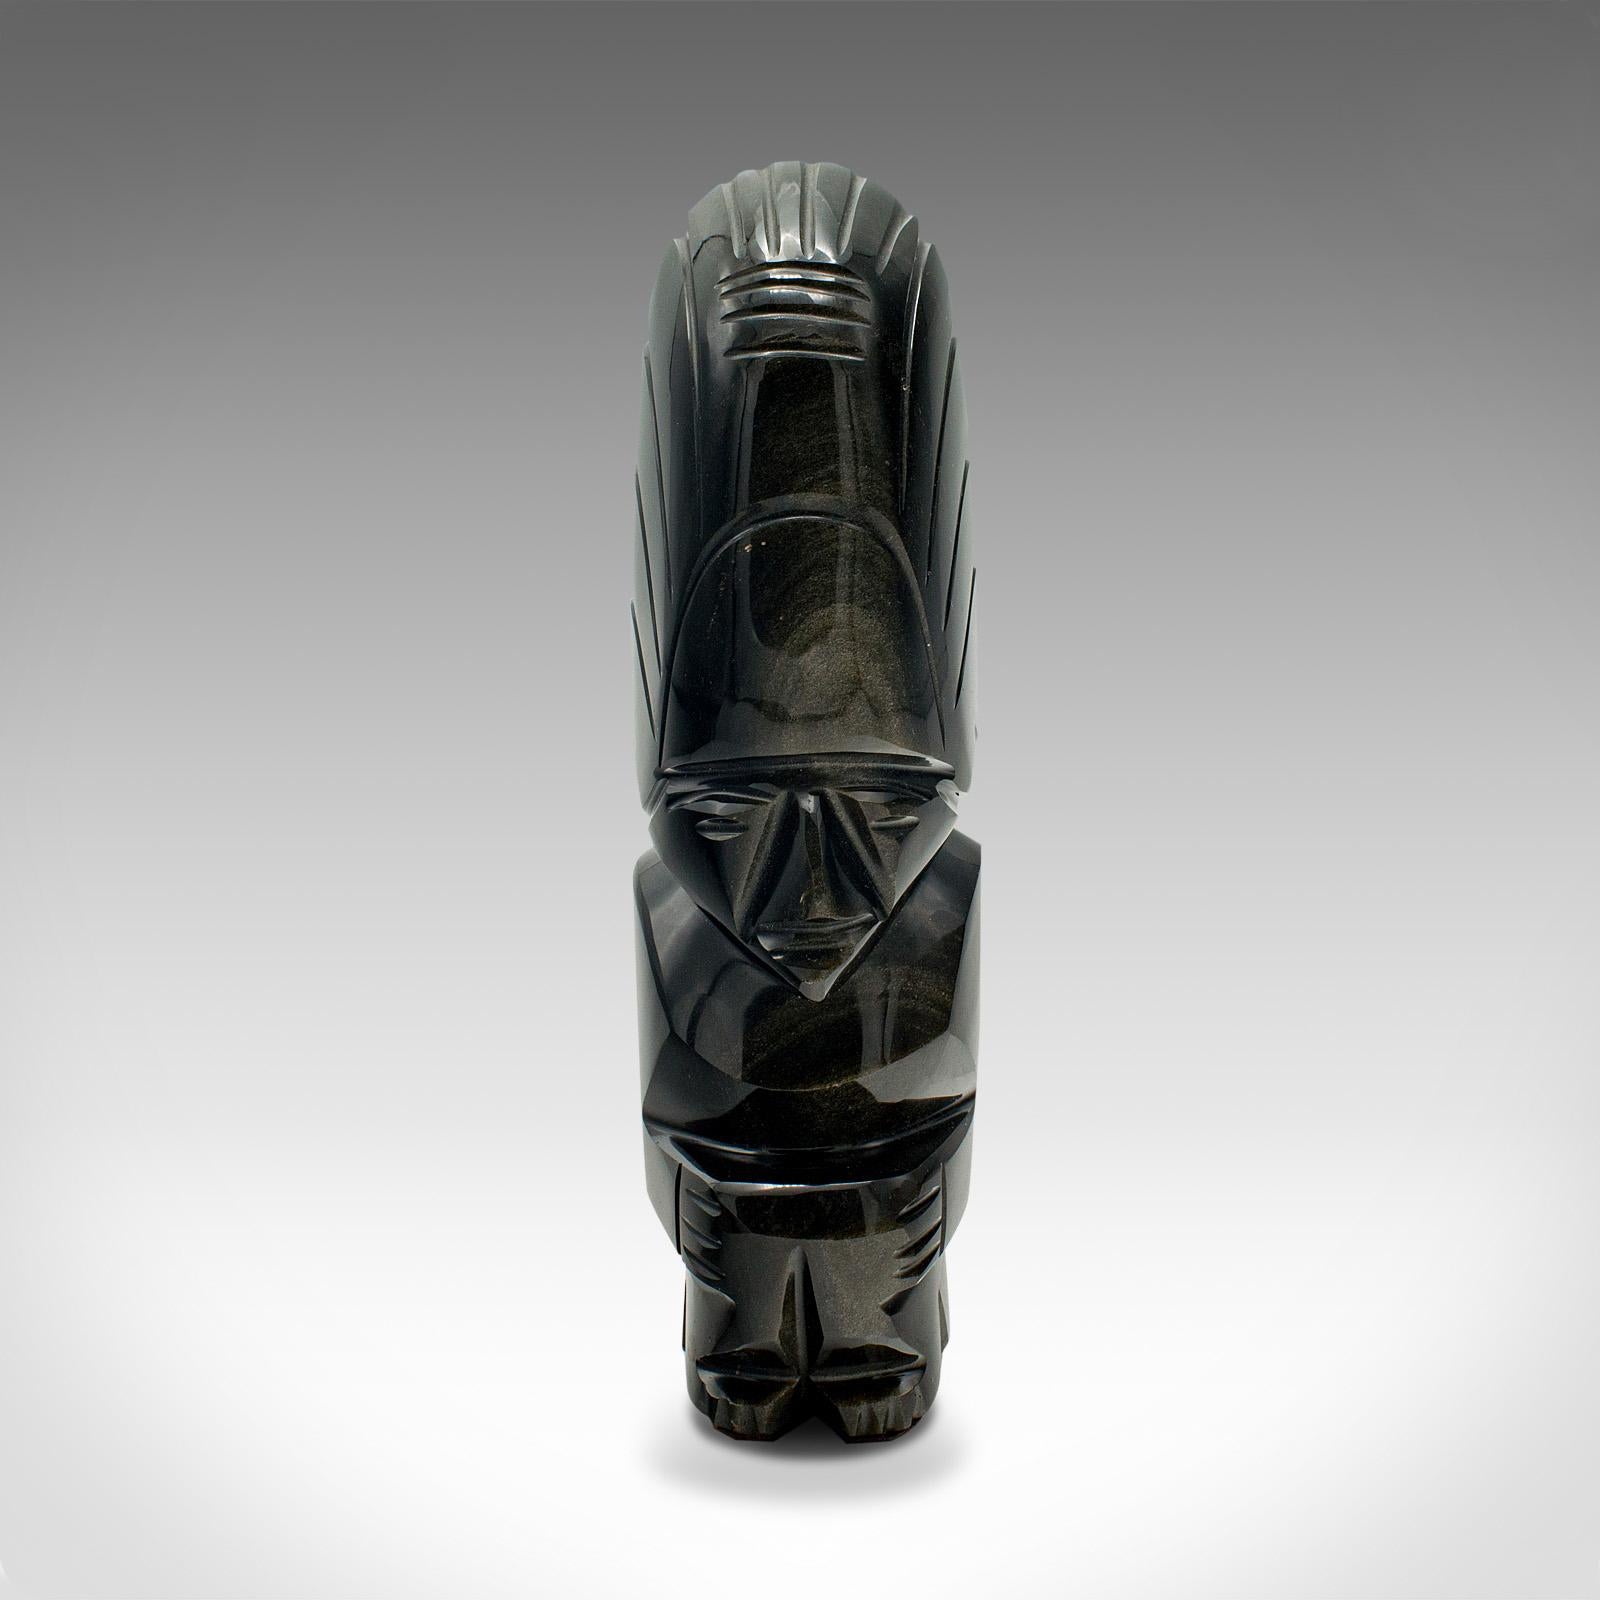 This is a small vintage Aztec idol figure. A South American, obsidian Mayan sculpture, dating to the Mid-20th Century, circa 1950.

Distinctive chief figure with striking stone quality.
Displays a desirable aged patina and in good